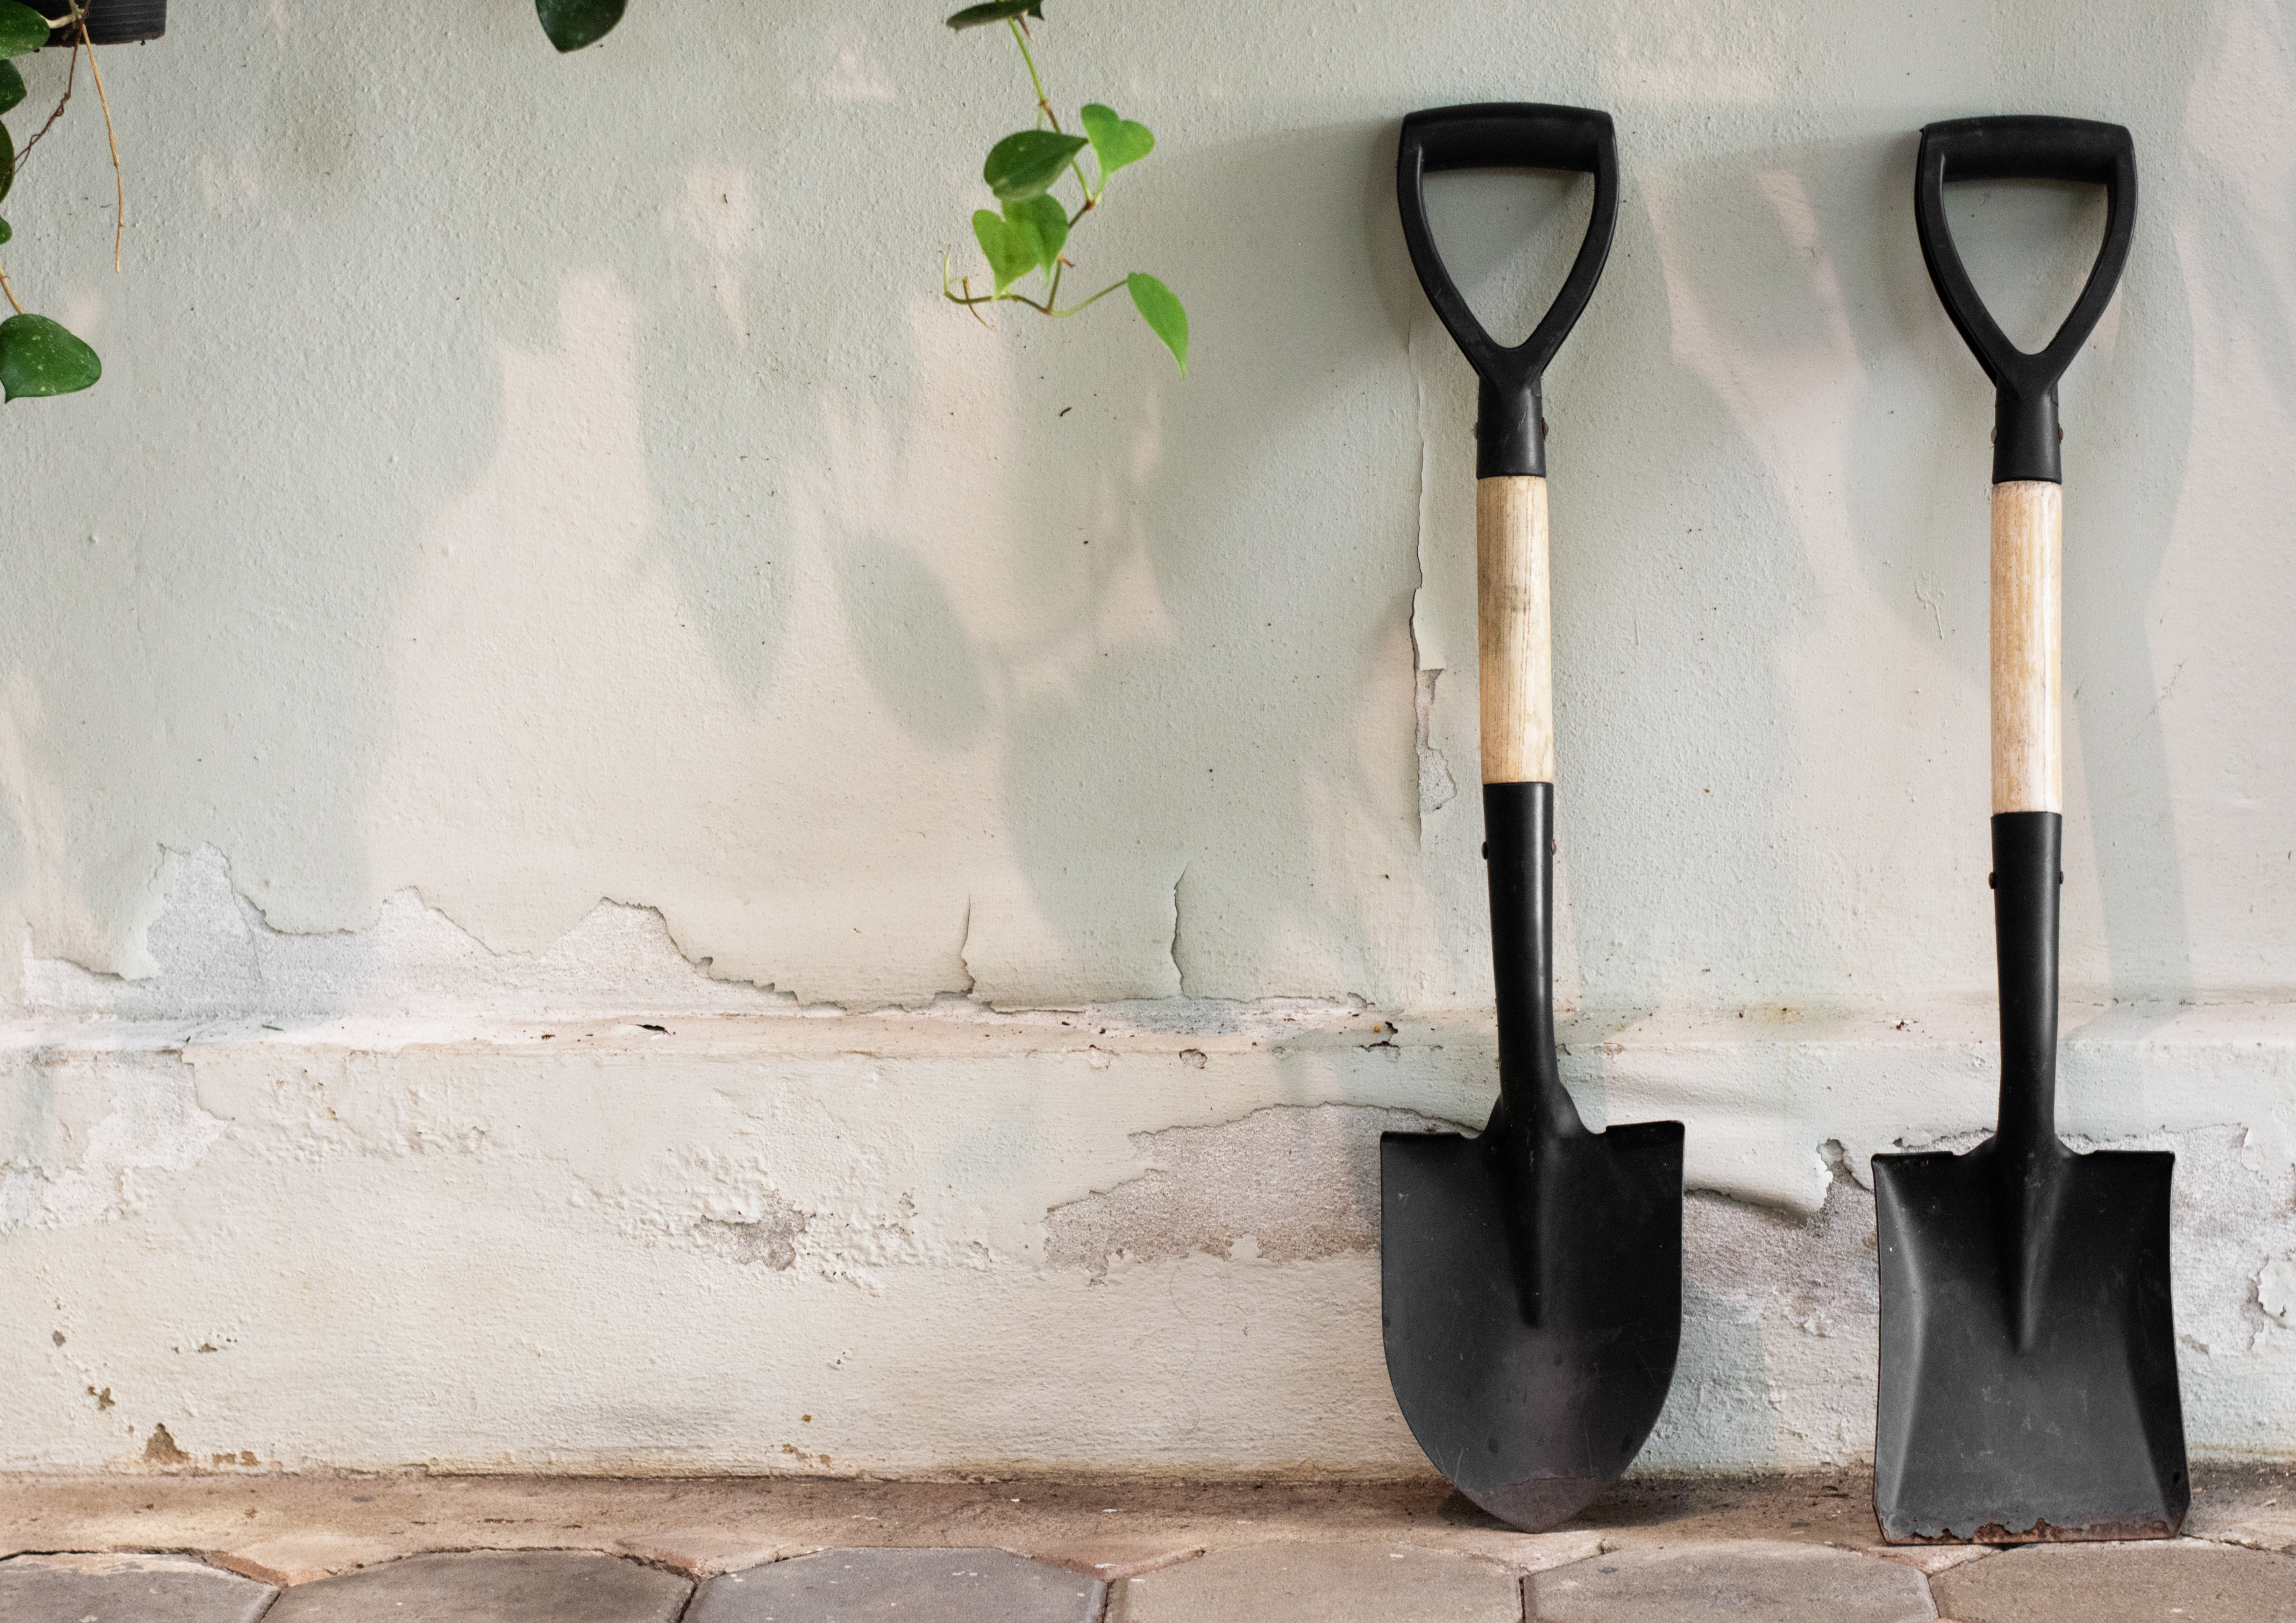 How to Care for your Garden Tools